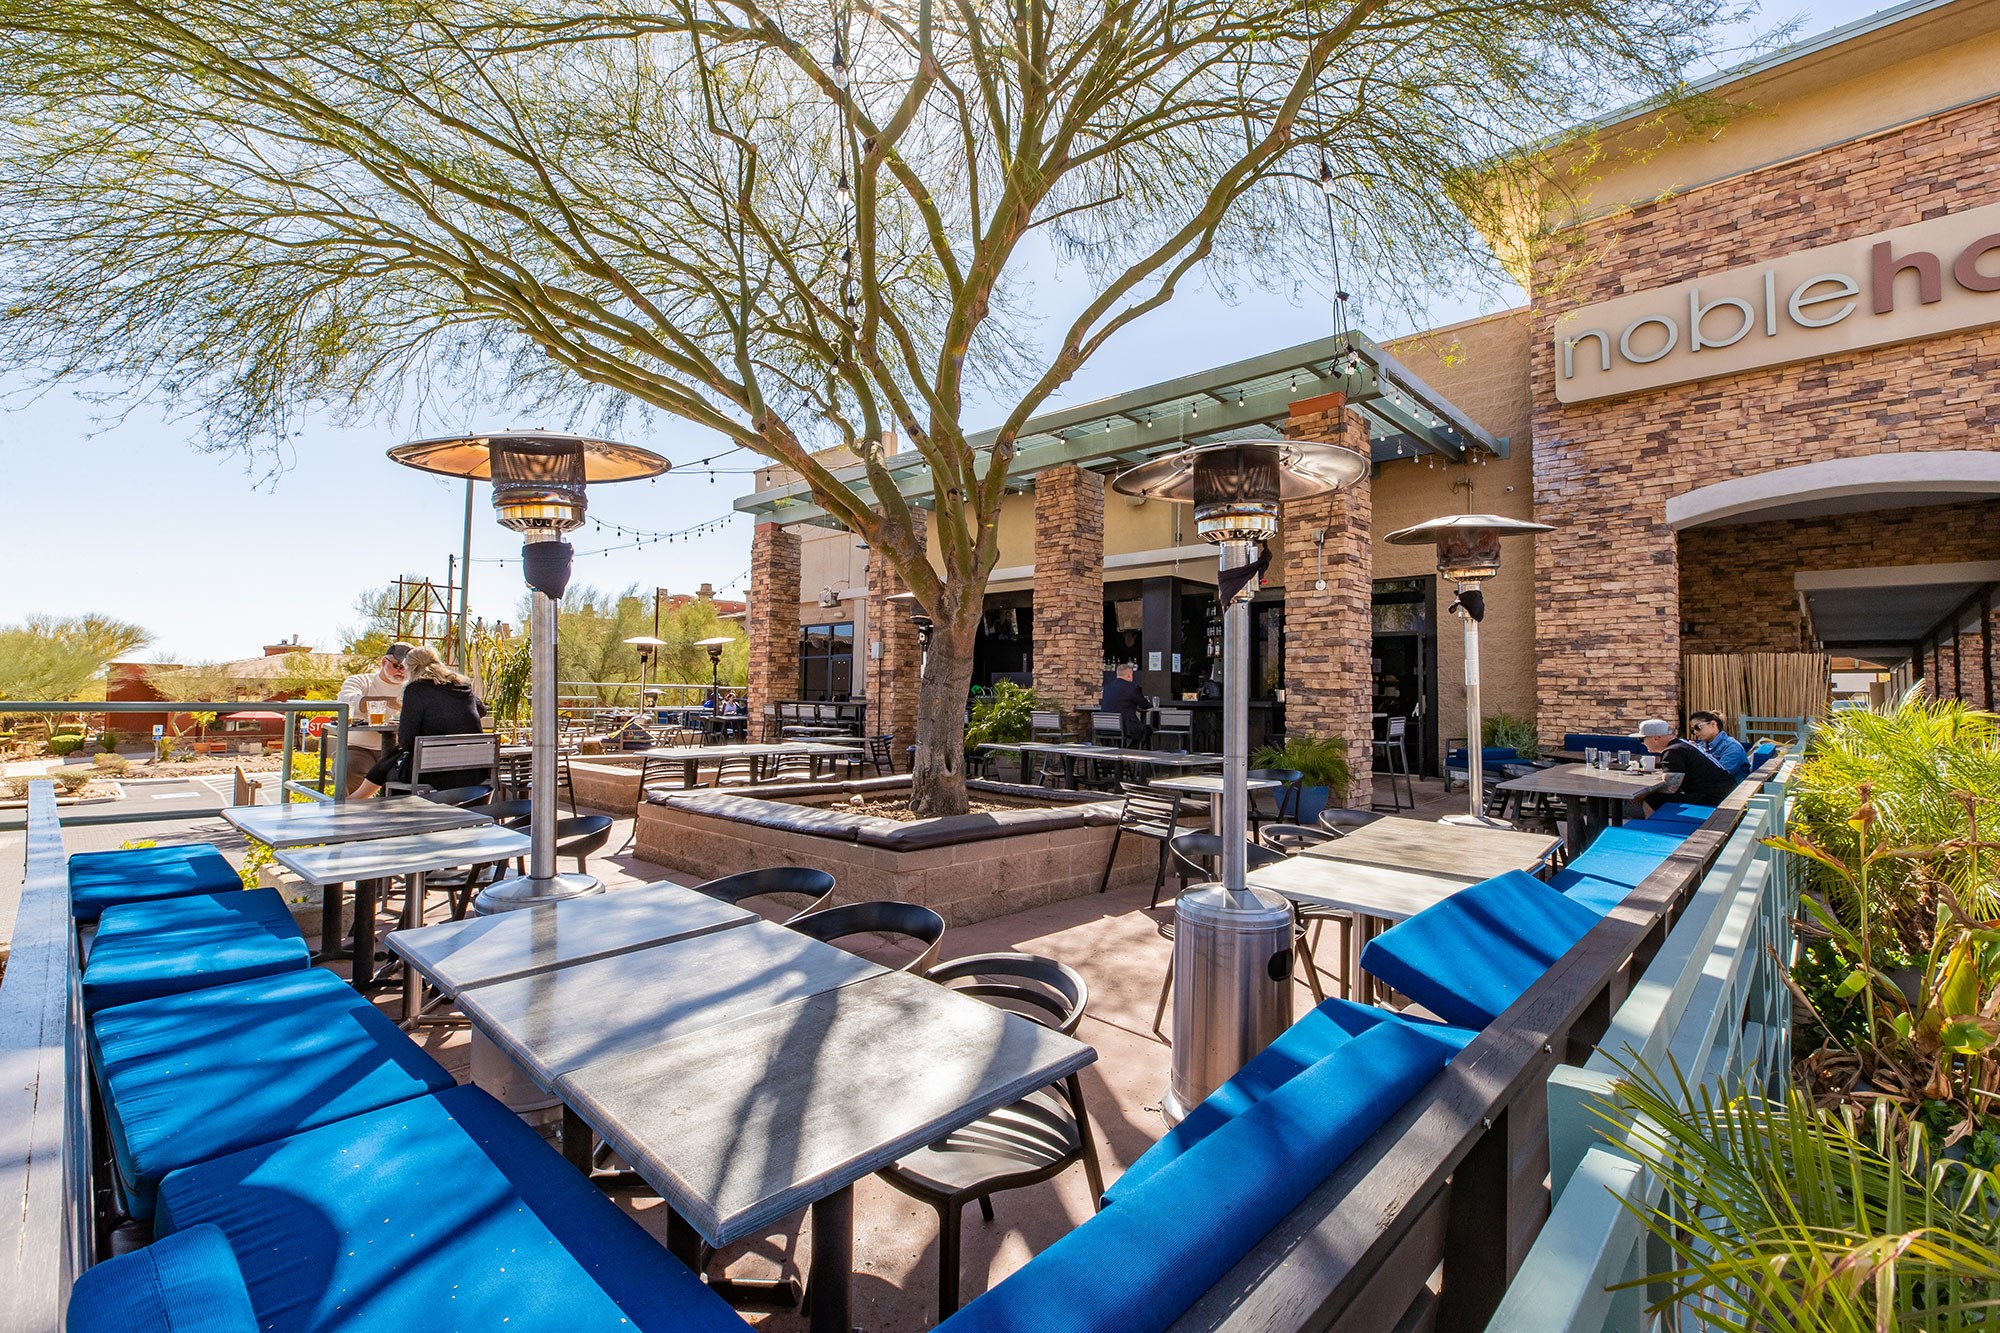 Patio at Noble Hops in Oro Valley (Photo courtesy of Noble Hops on Facebook)